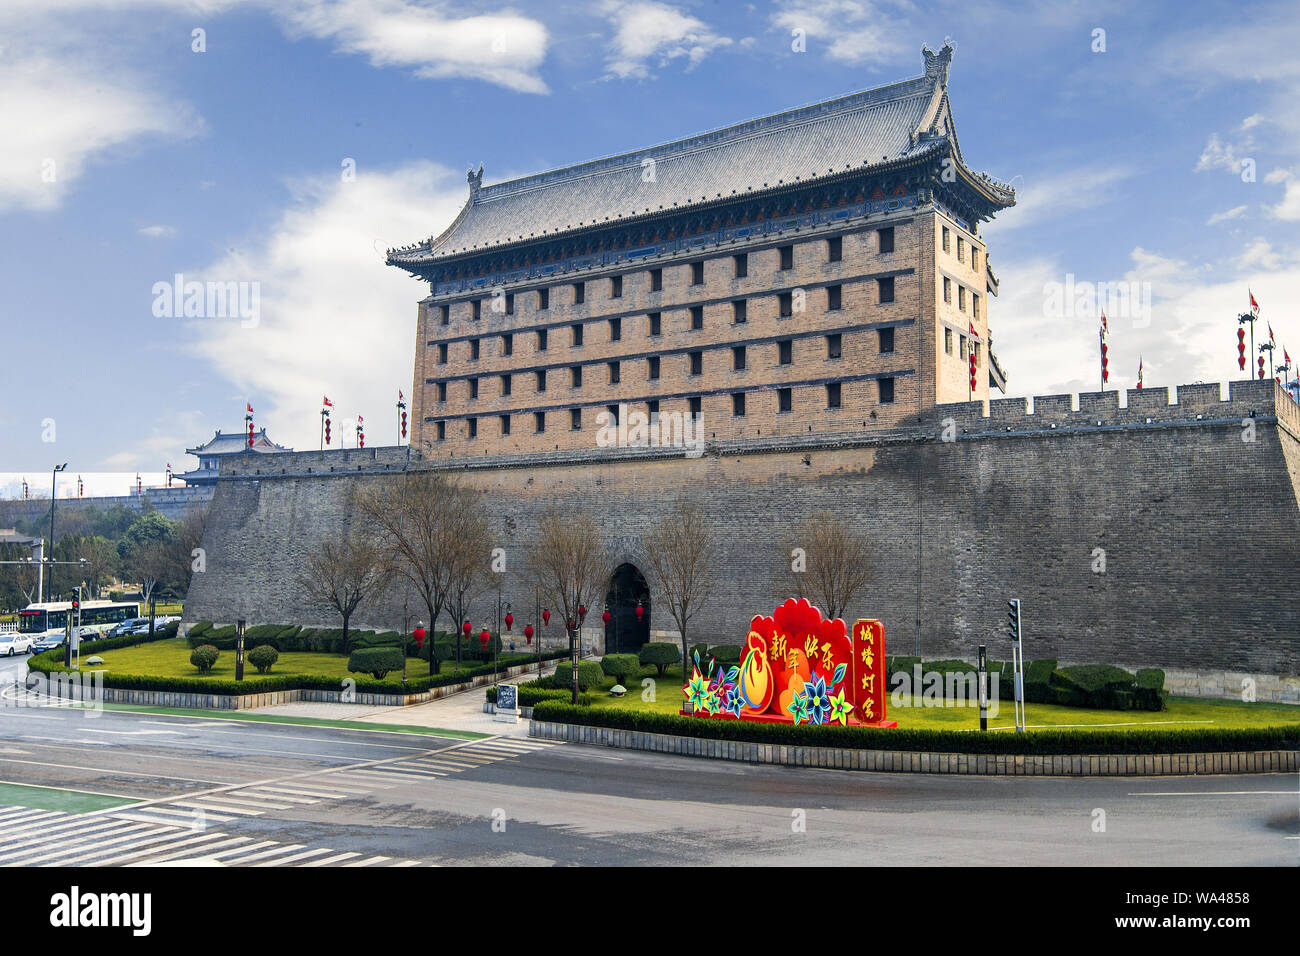 Xi 'an ancient city wall. Embrasured watchtower Stock Photo